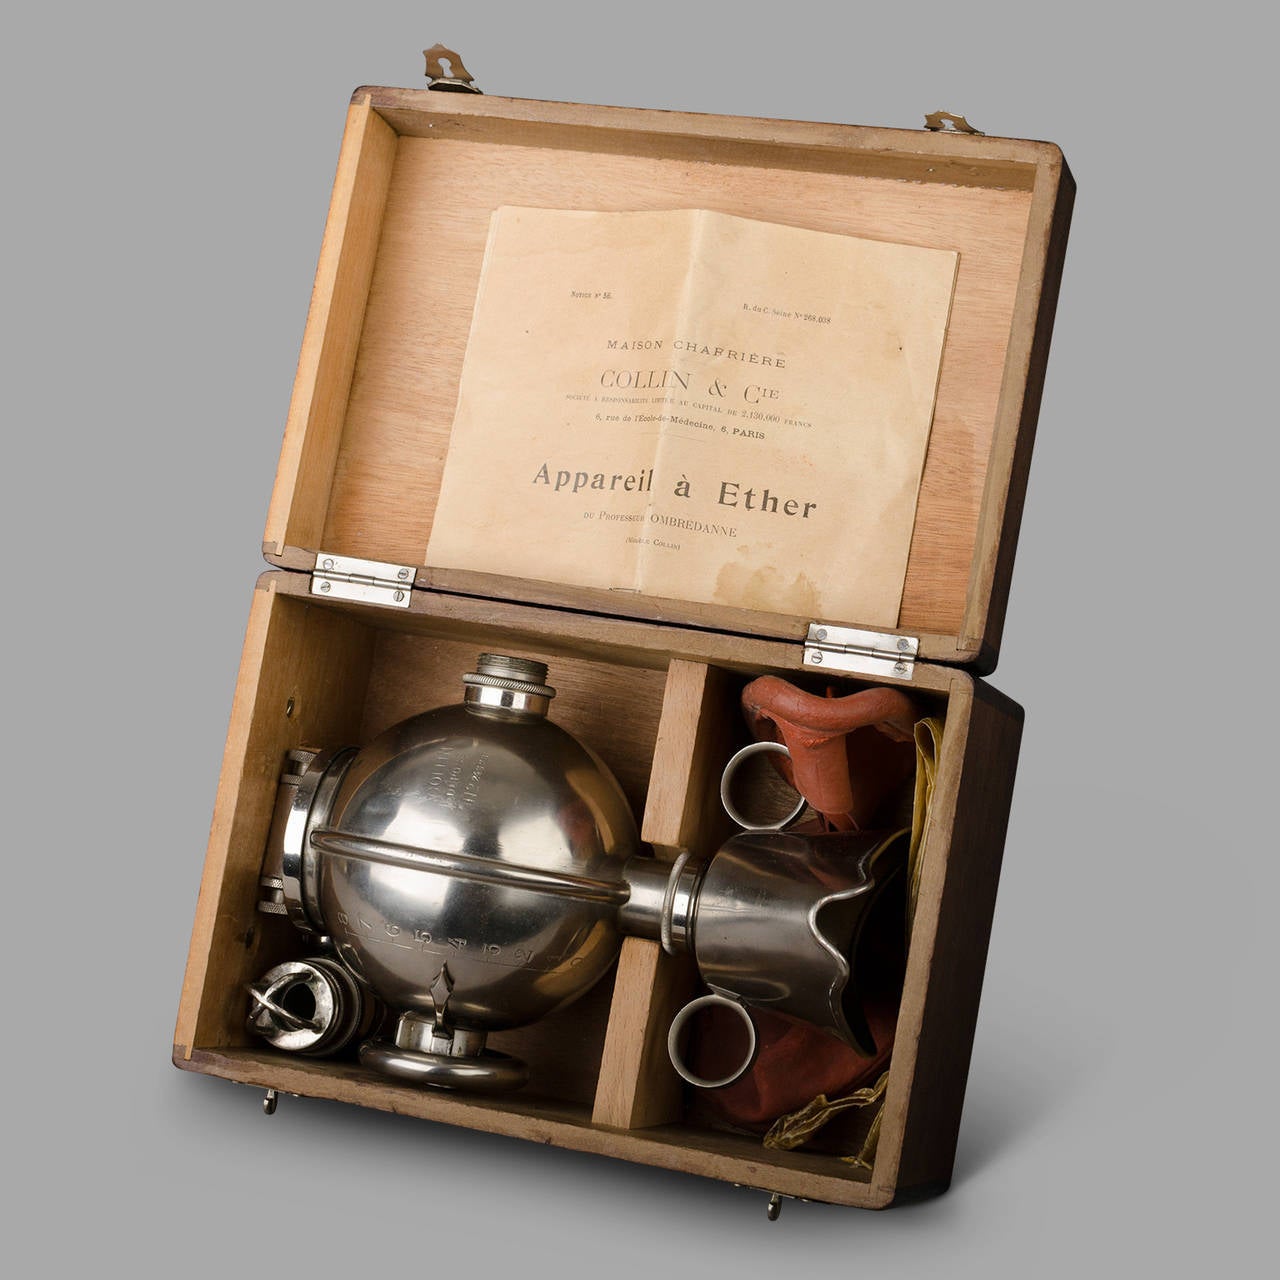 Professor Ombredanne ether device in its rosewood cabinet and with its original notice by the House Charriere - Collin & Co.

Nickel plated steel, complete set with 2 rubber masks (hardened by time) and its original never used pig's bladder (uncut